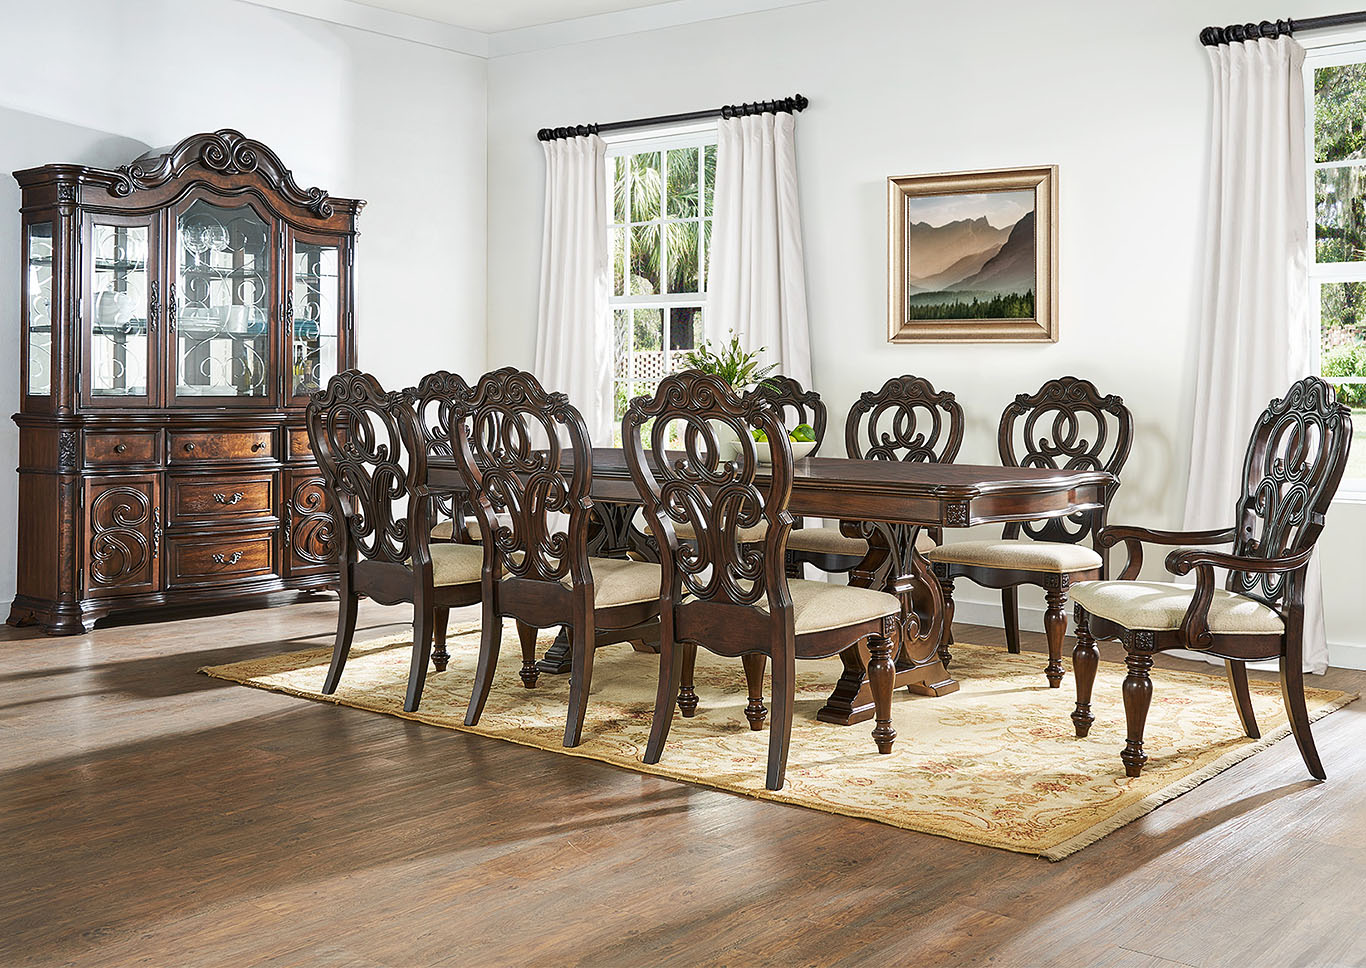 Royale Pecan Brown Formal Dining Set W, Formal Dining Room Chairs With Arms